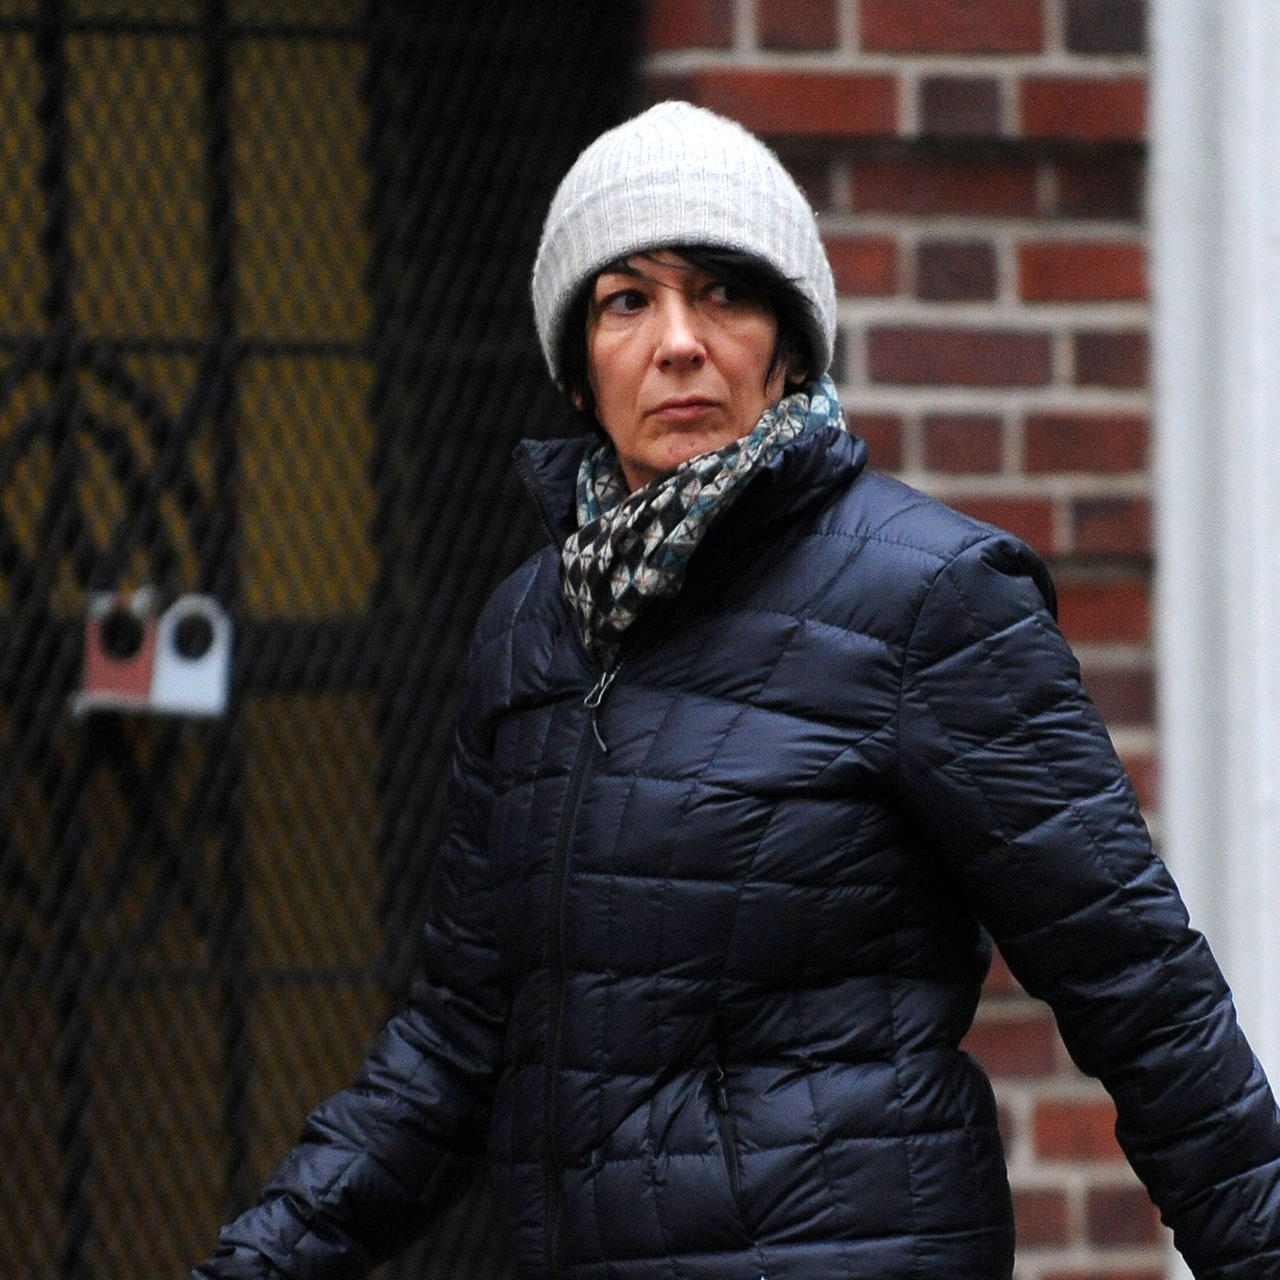 Ghislaine Maxwell is an agent of the patriarchy; not a victim of it